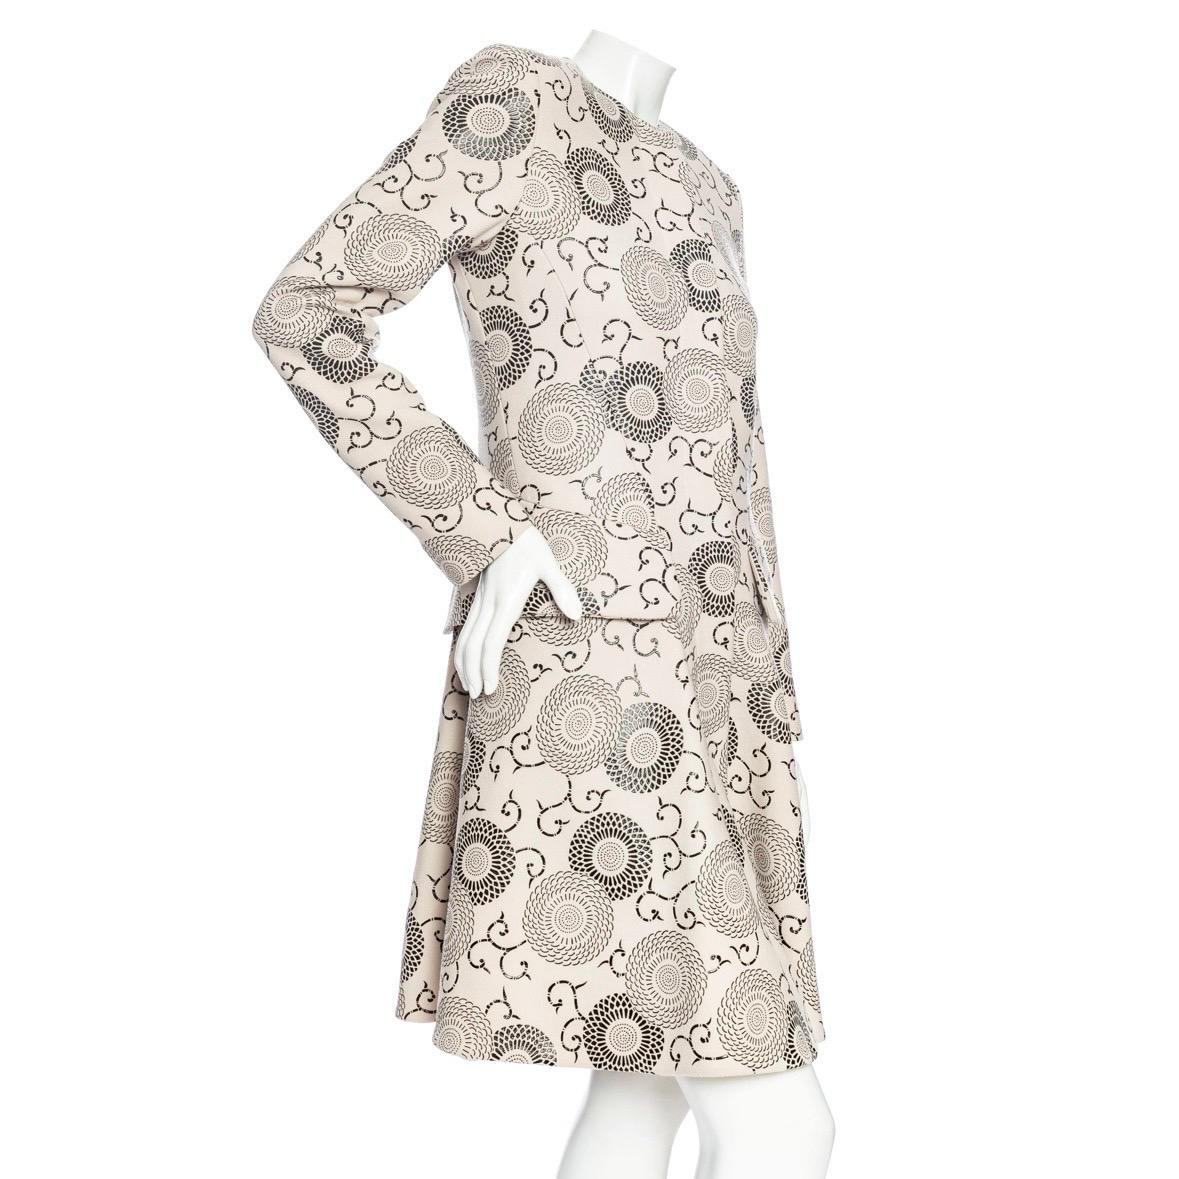 Etro Cream and Black Floral Print Swing Coat Fall2012 In Excellent Condition For Sale In Los Angeles, CA